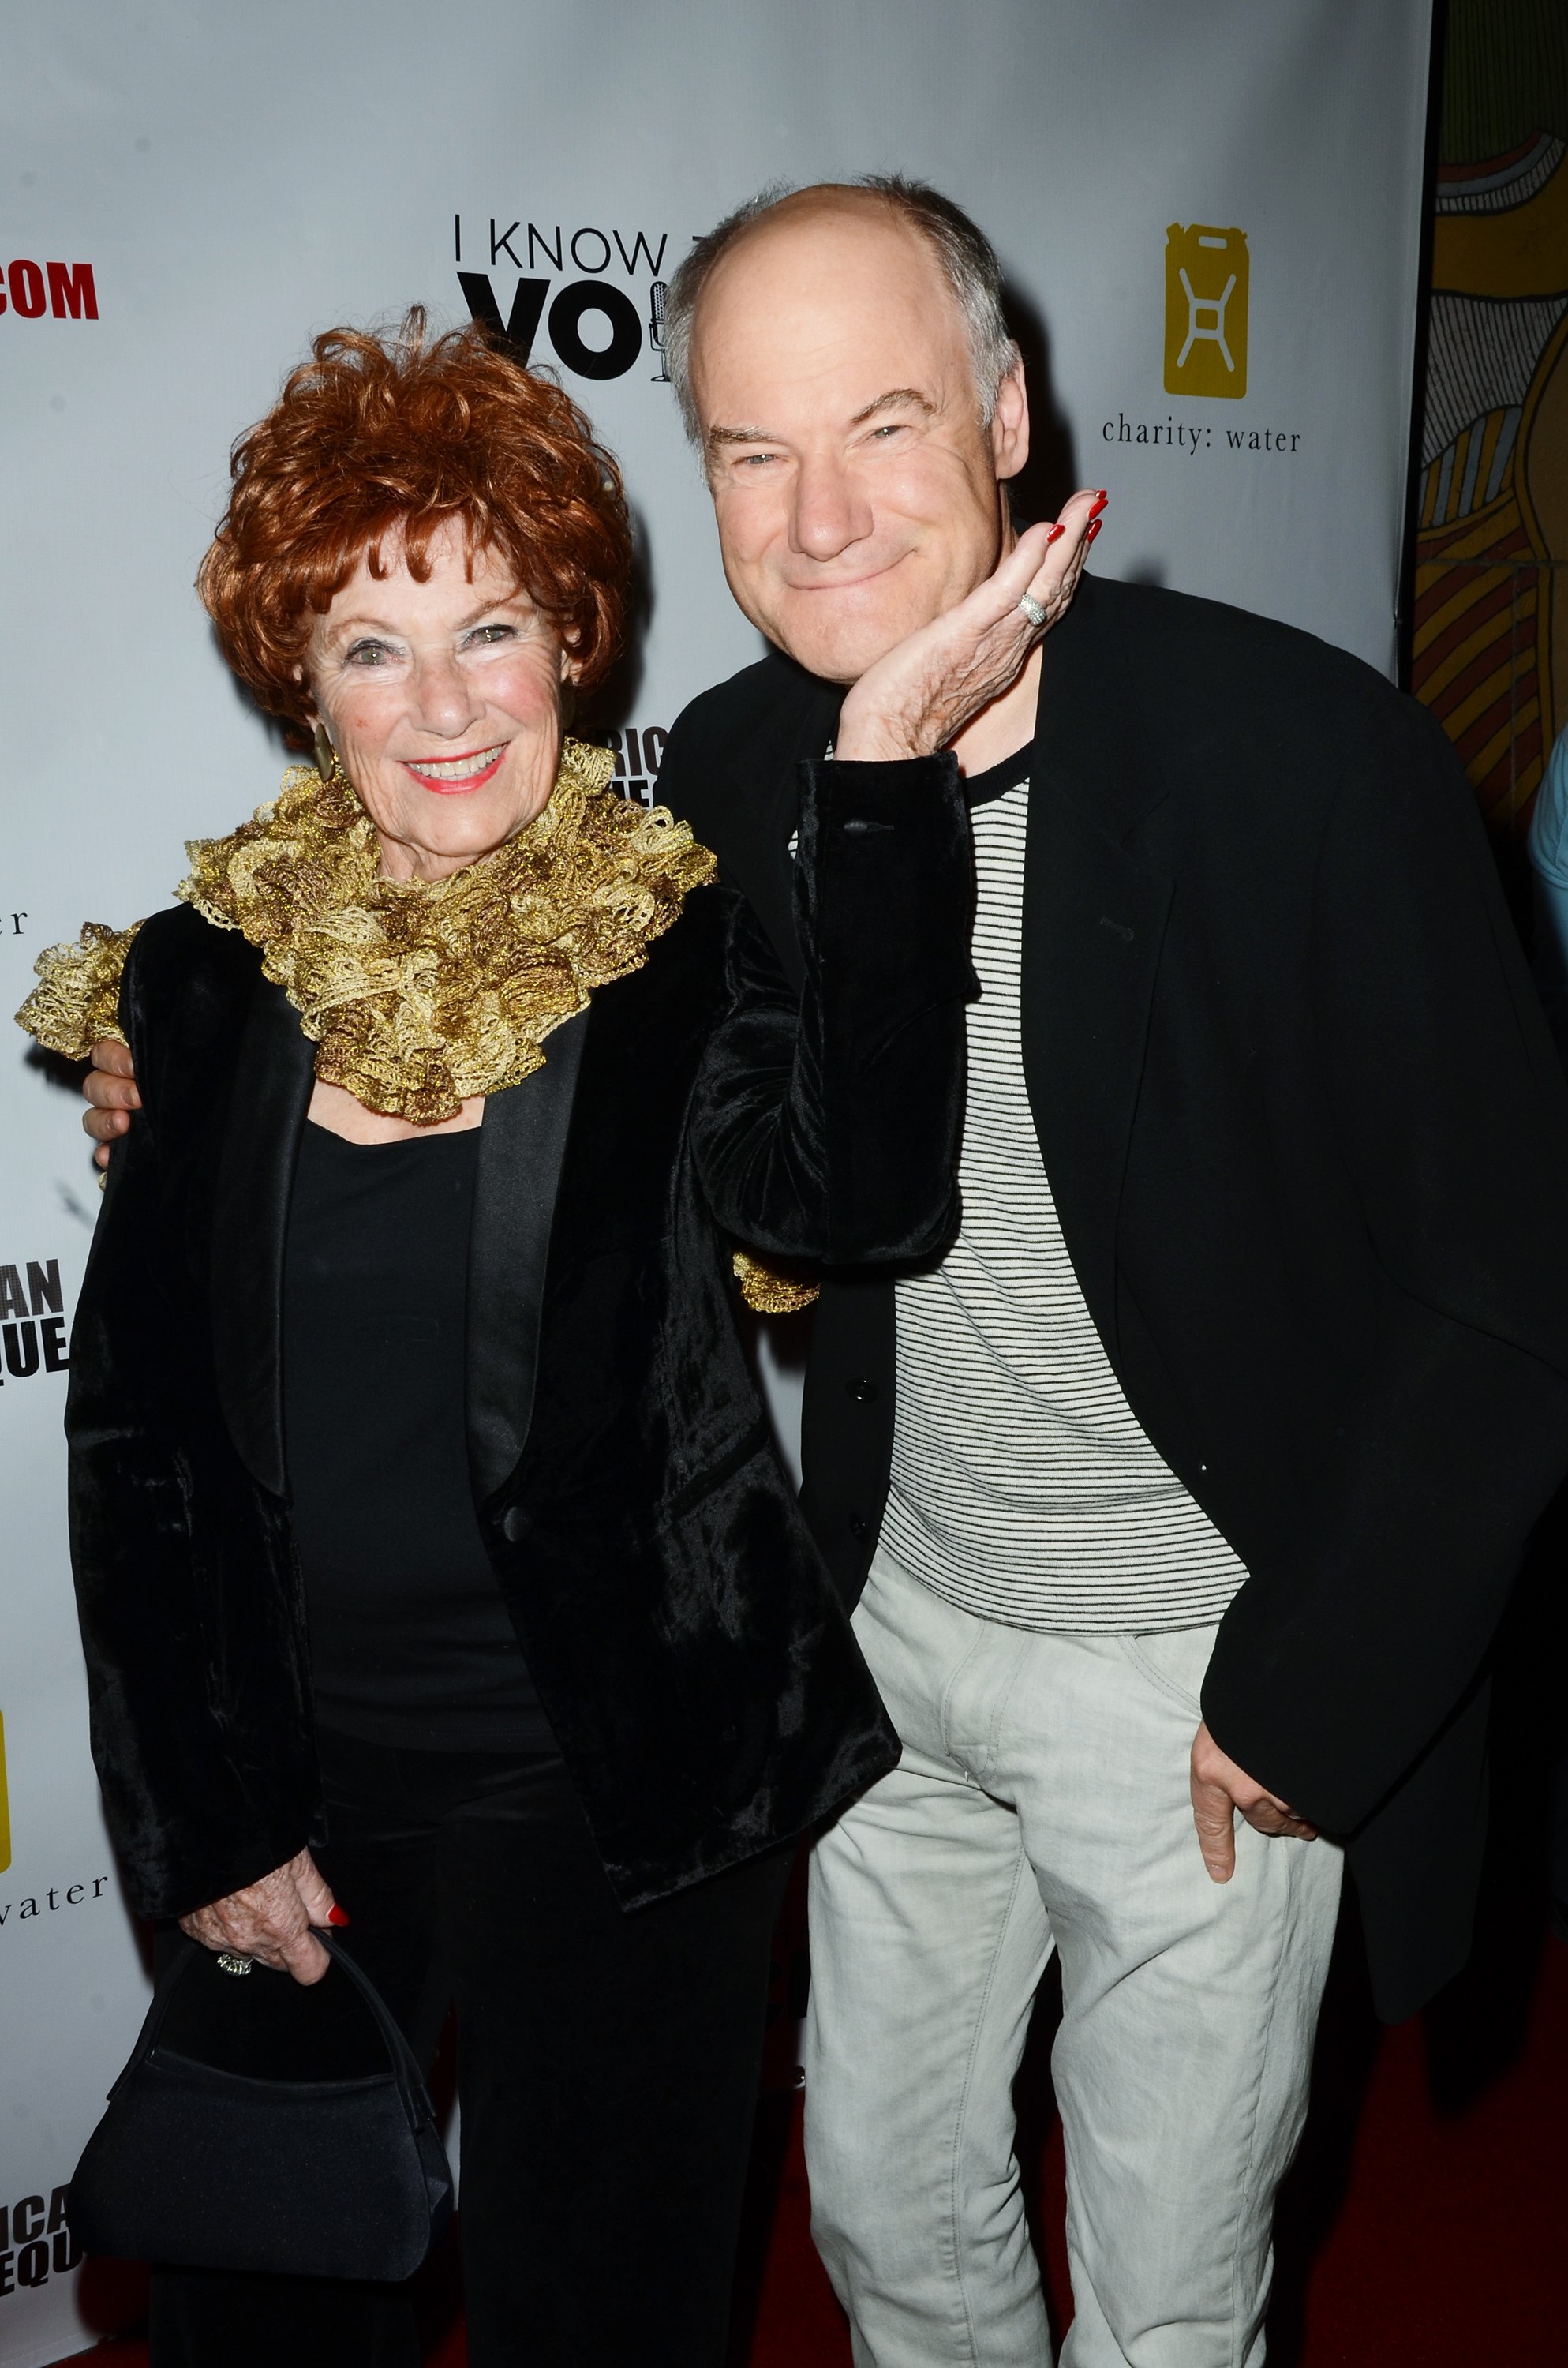 Marion Ross and her son Jim attend a Los Angeles movie premiere at American Cinematheque's Egyptian Theatre on November 6, 2013 in Hollywood, California. | Source: Getty Images